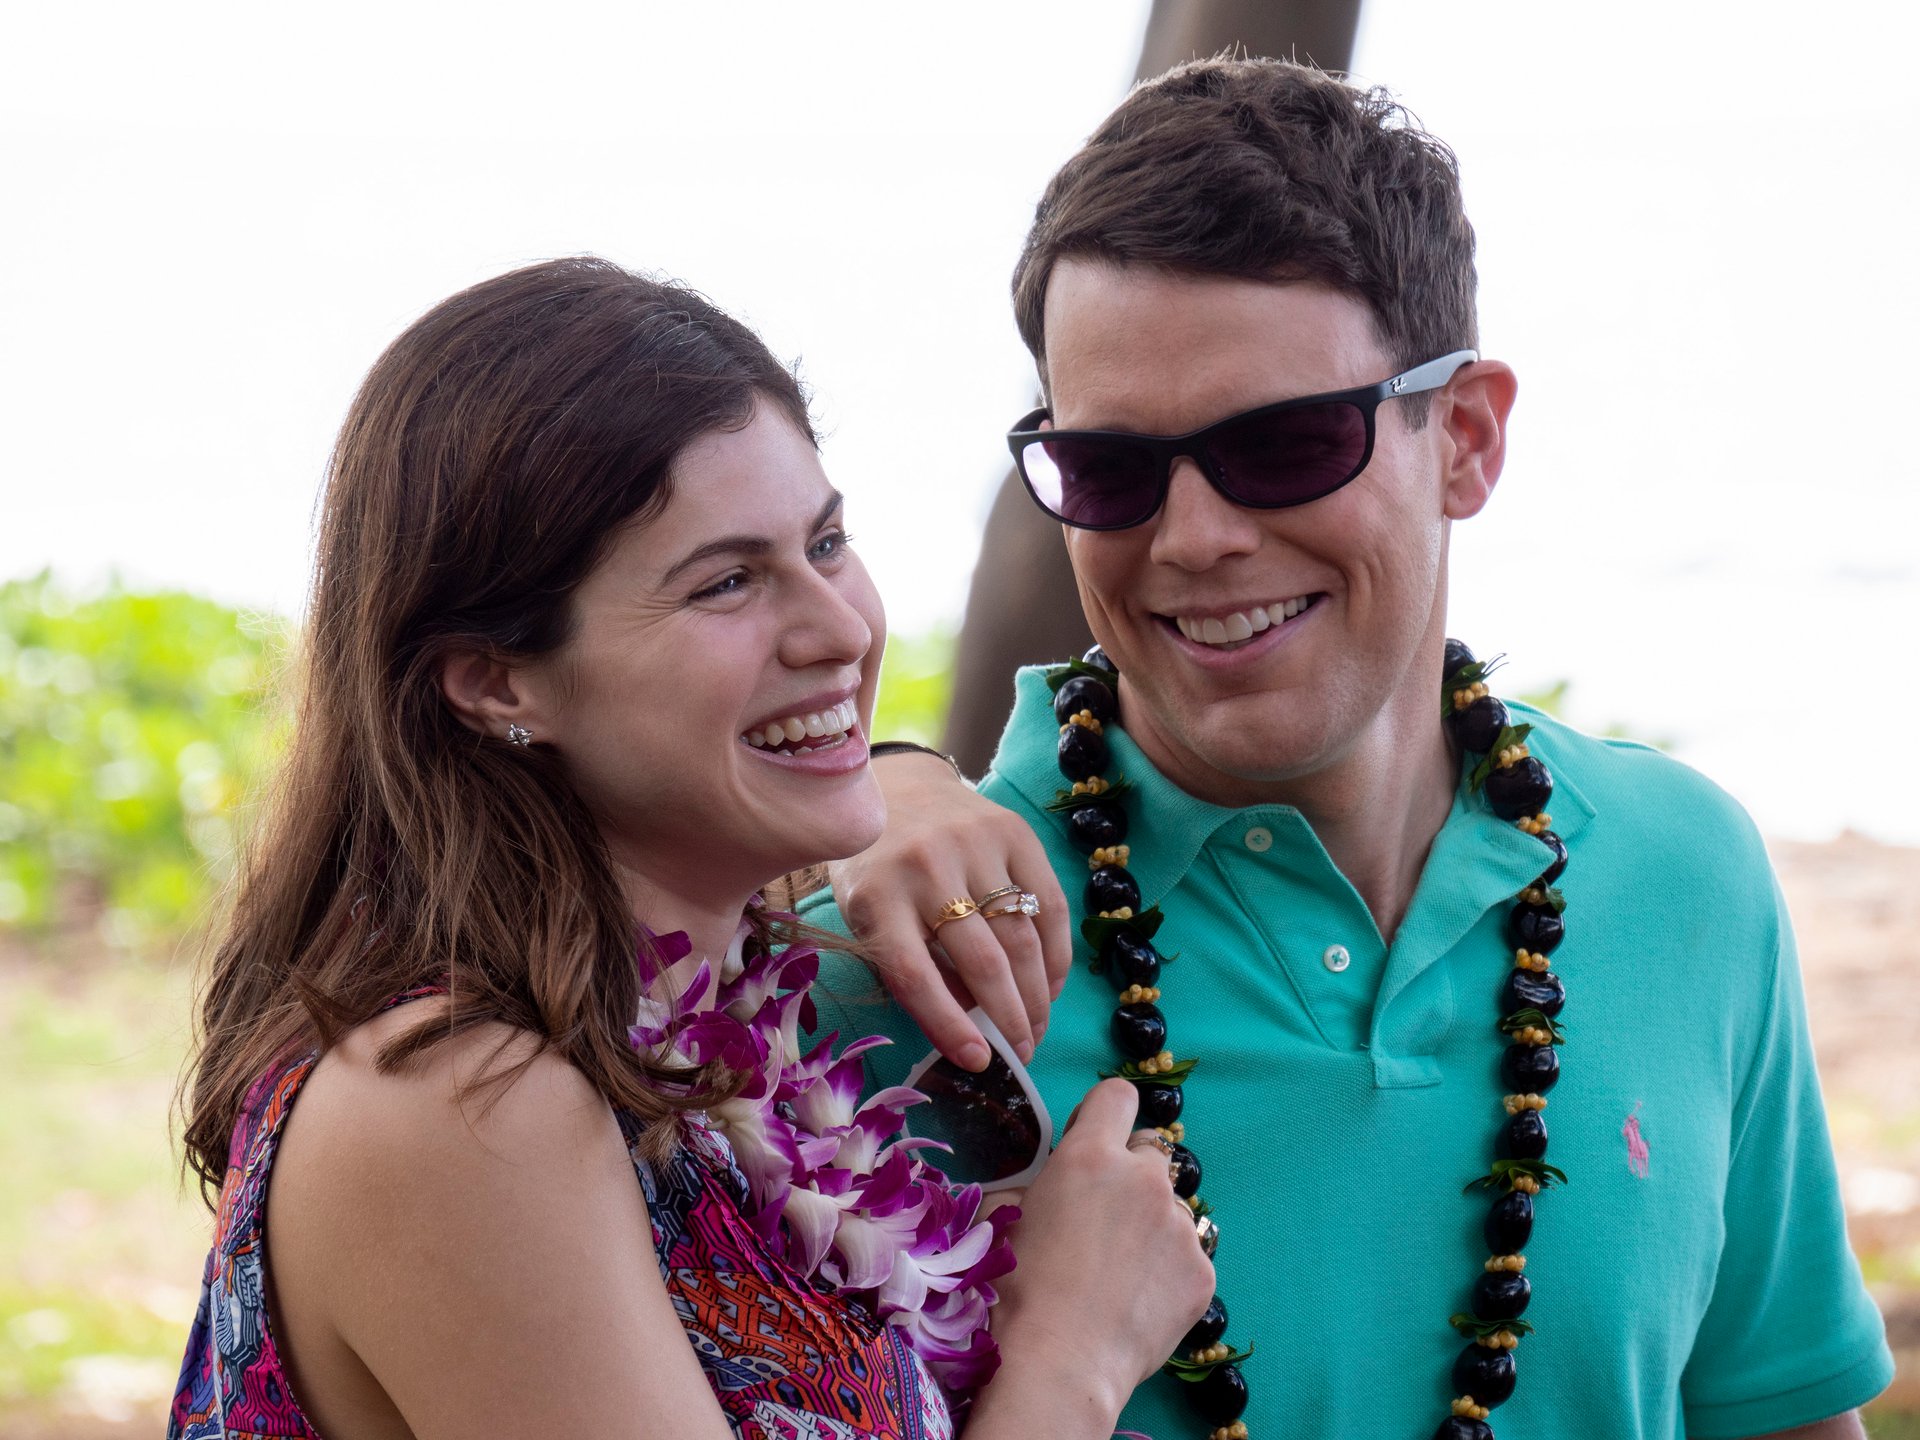 Alexandra Daddario and Jake Lacy on 'The White Lotus.' Daddario, on the left, smiles while leaning on Lacy. Lacy is wearing sunglasses and a turquoise polo and looking at her, smiling.